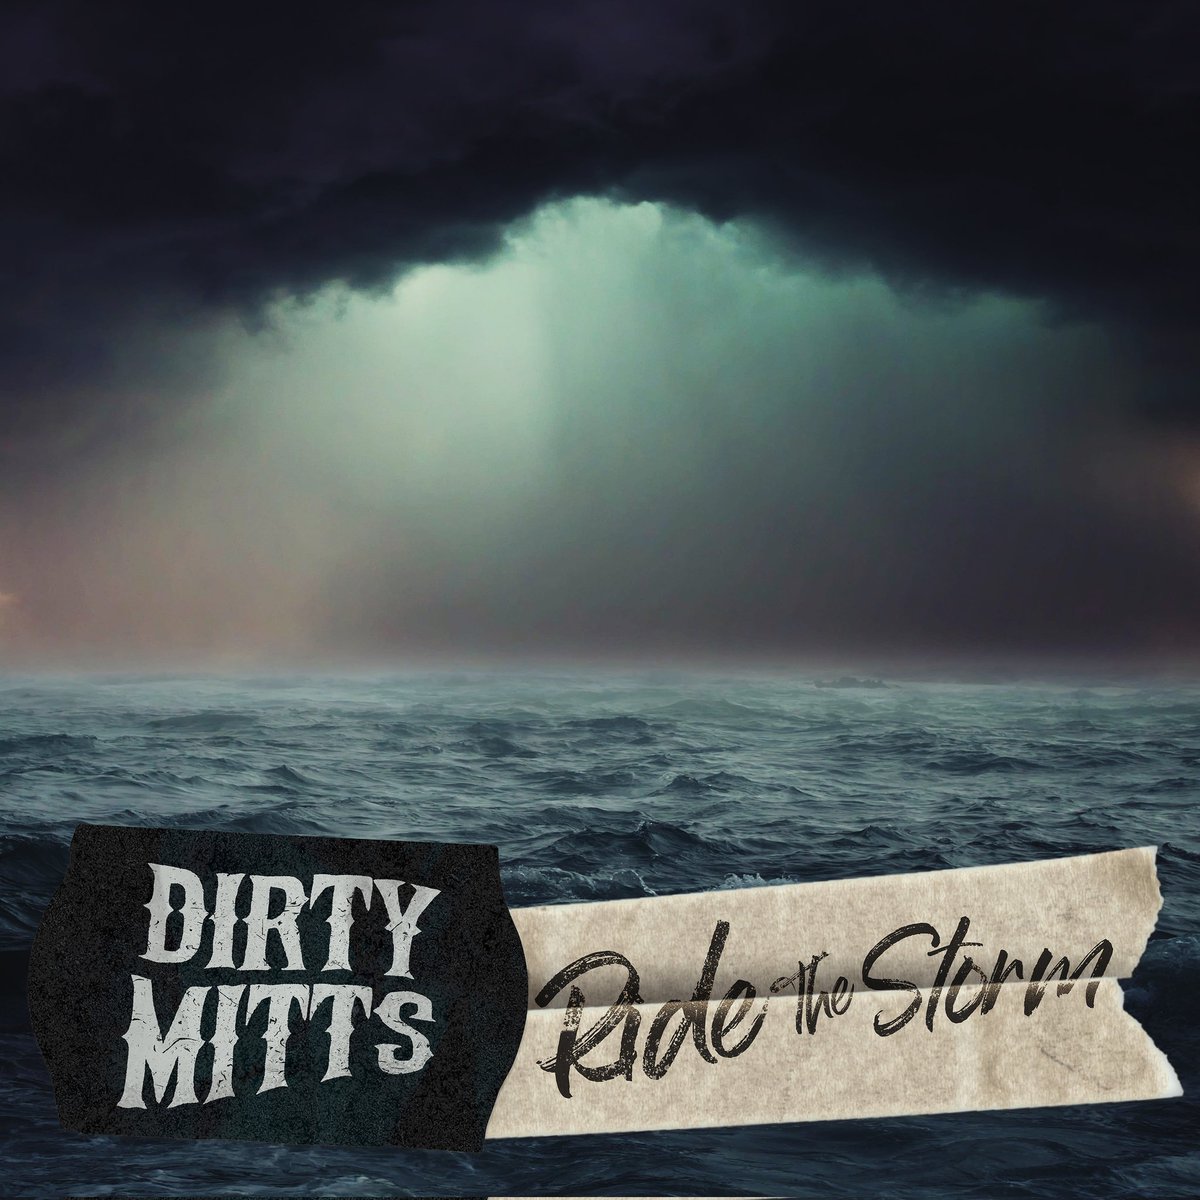 🌪️ Revealing our cover art for 'Ride The Storm'! Dropping Nov 3rd. Fresh sound, timeless rock. Be ready. 🎸 #DirtyMitts #RideTheStorm #Nov3 Can't wait to work with @SaNPRuk again 🤘